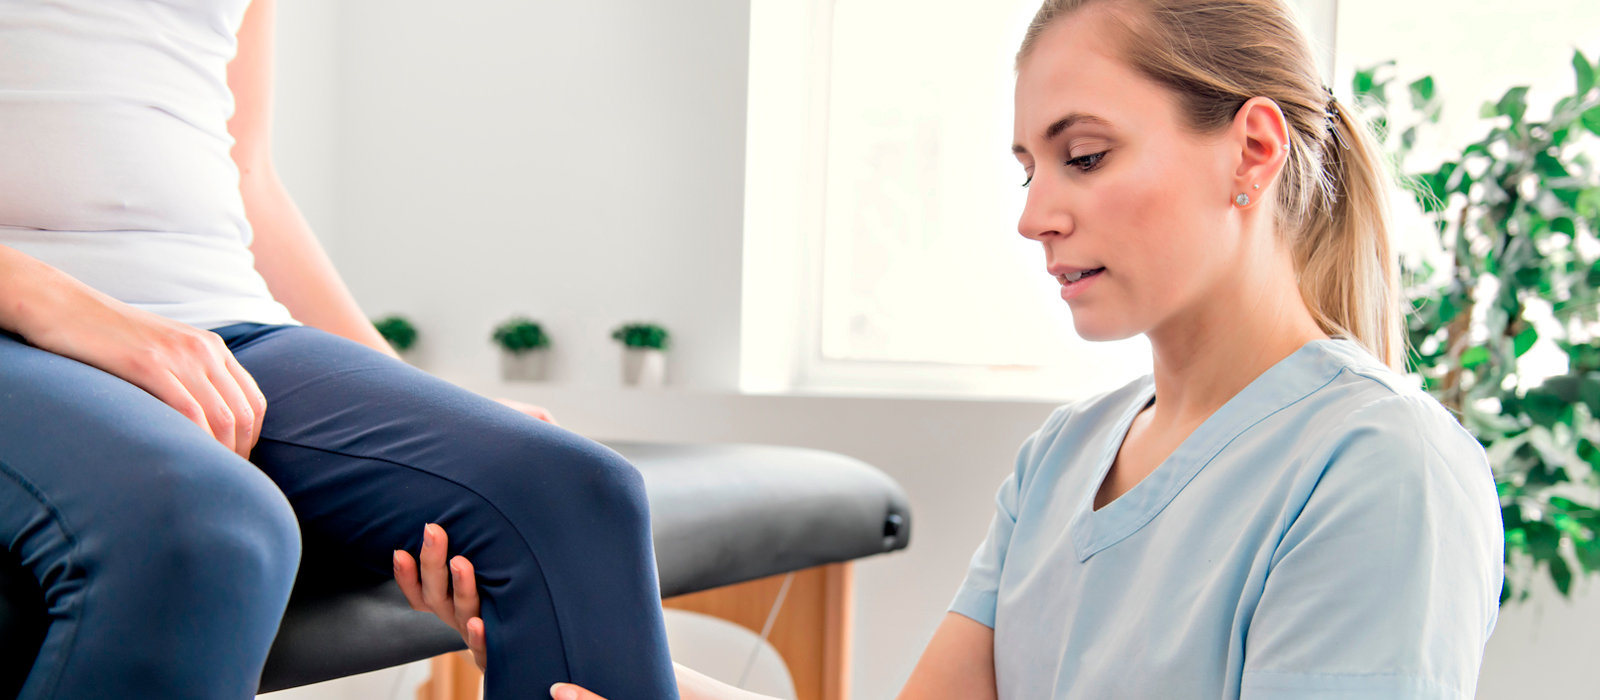 Physiotherapy and ergonomic solutions -woman physio inspecting patient knee